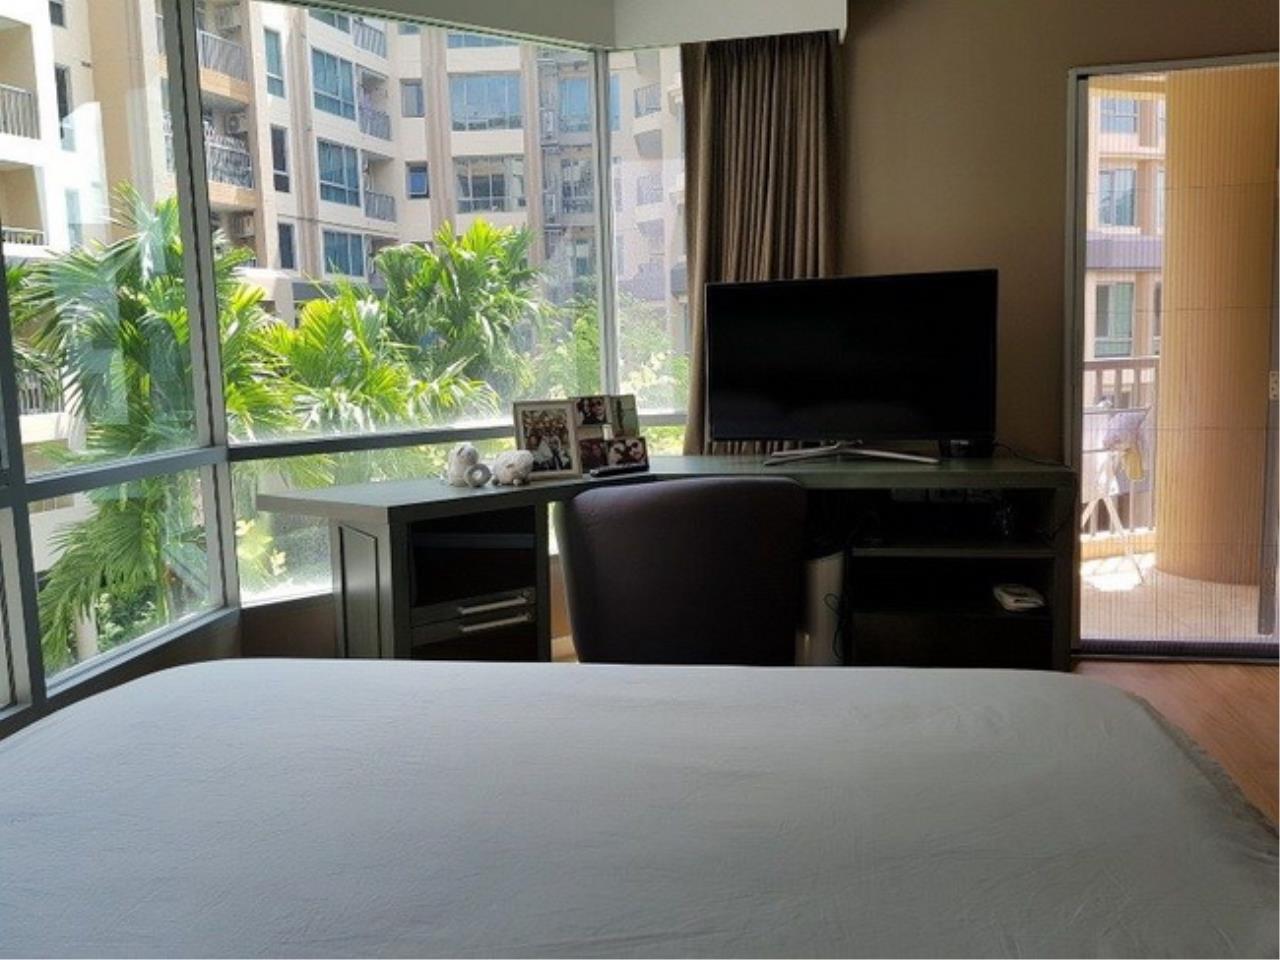 Forbest Properties Agency's 37750 - Siamese, Nanglinchee Rd., Condo for sale, area 81 Sq.m. 1